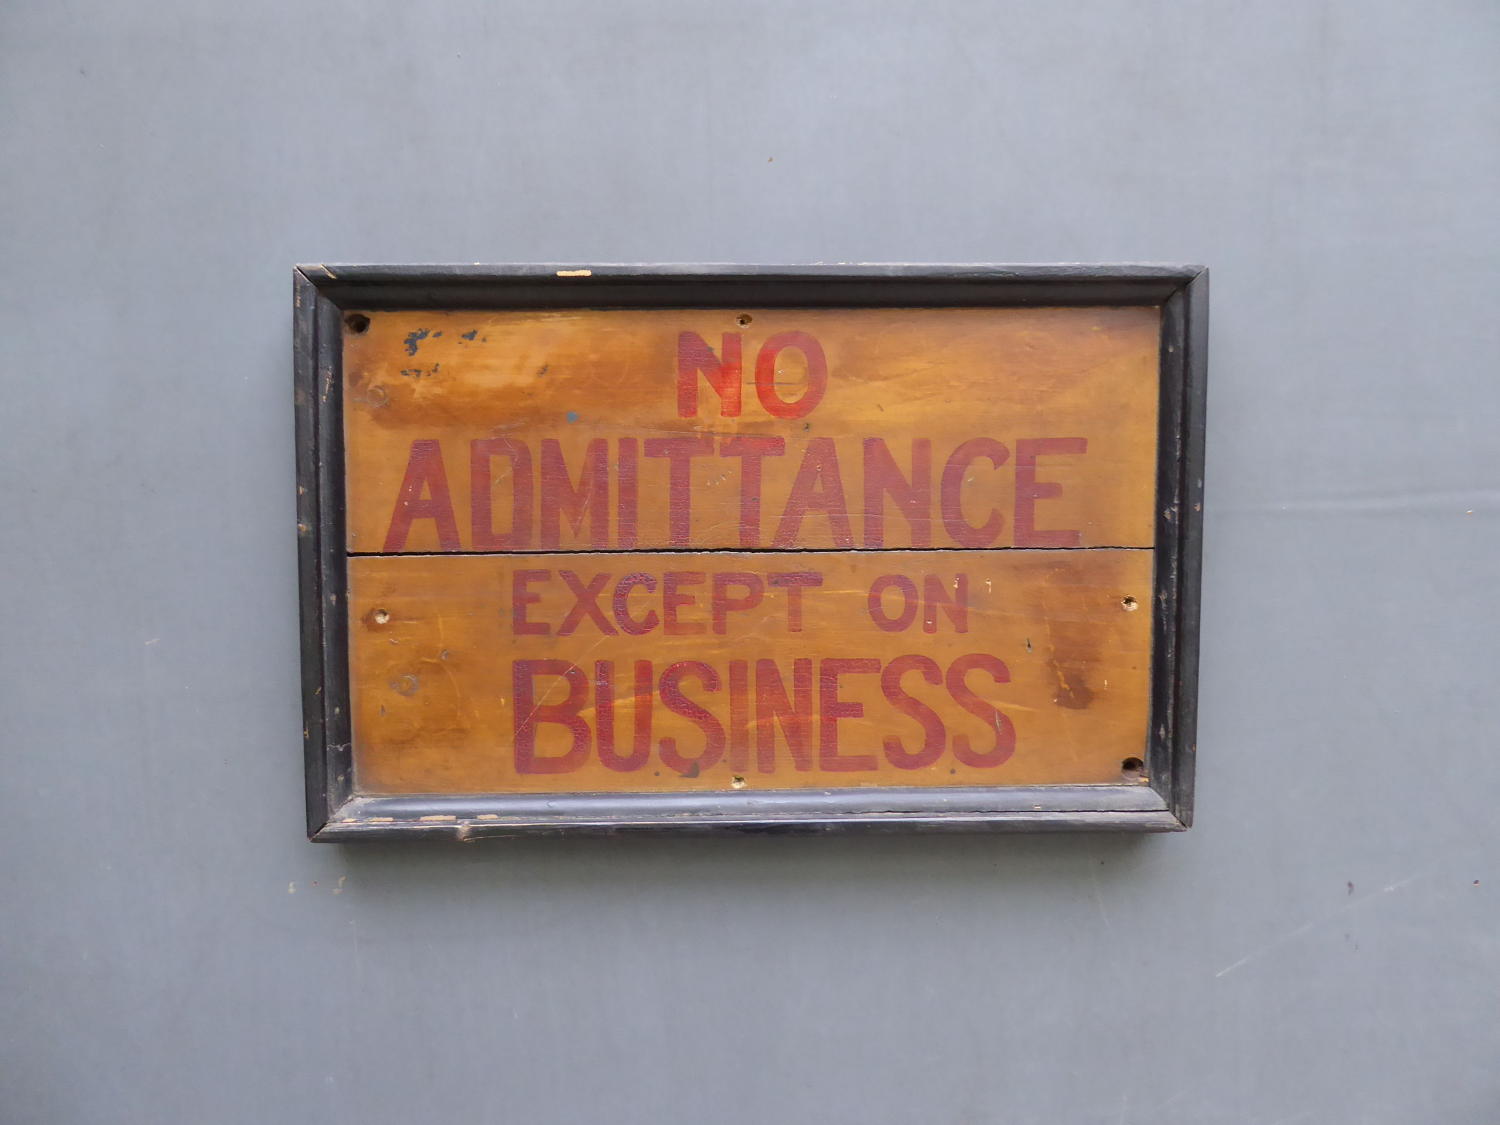 No Admittance ~ Except On Business